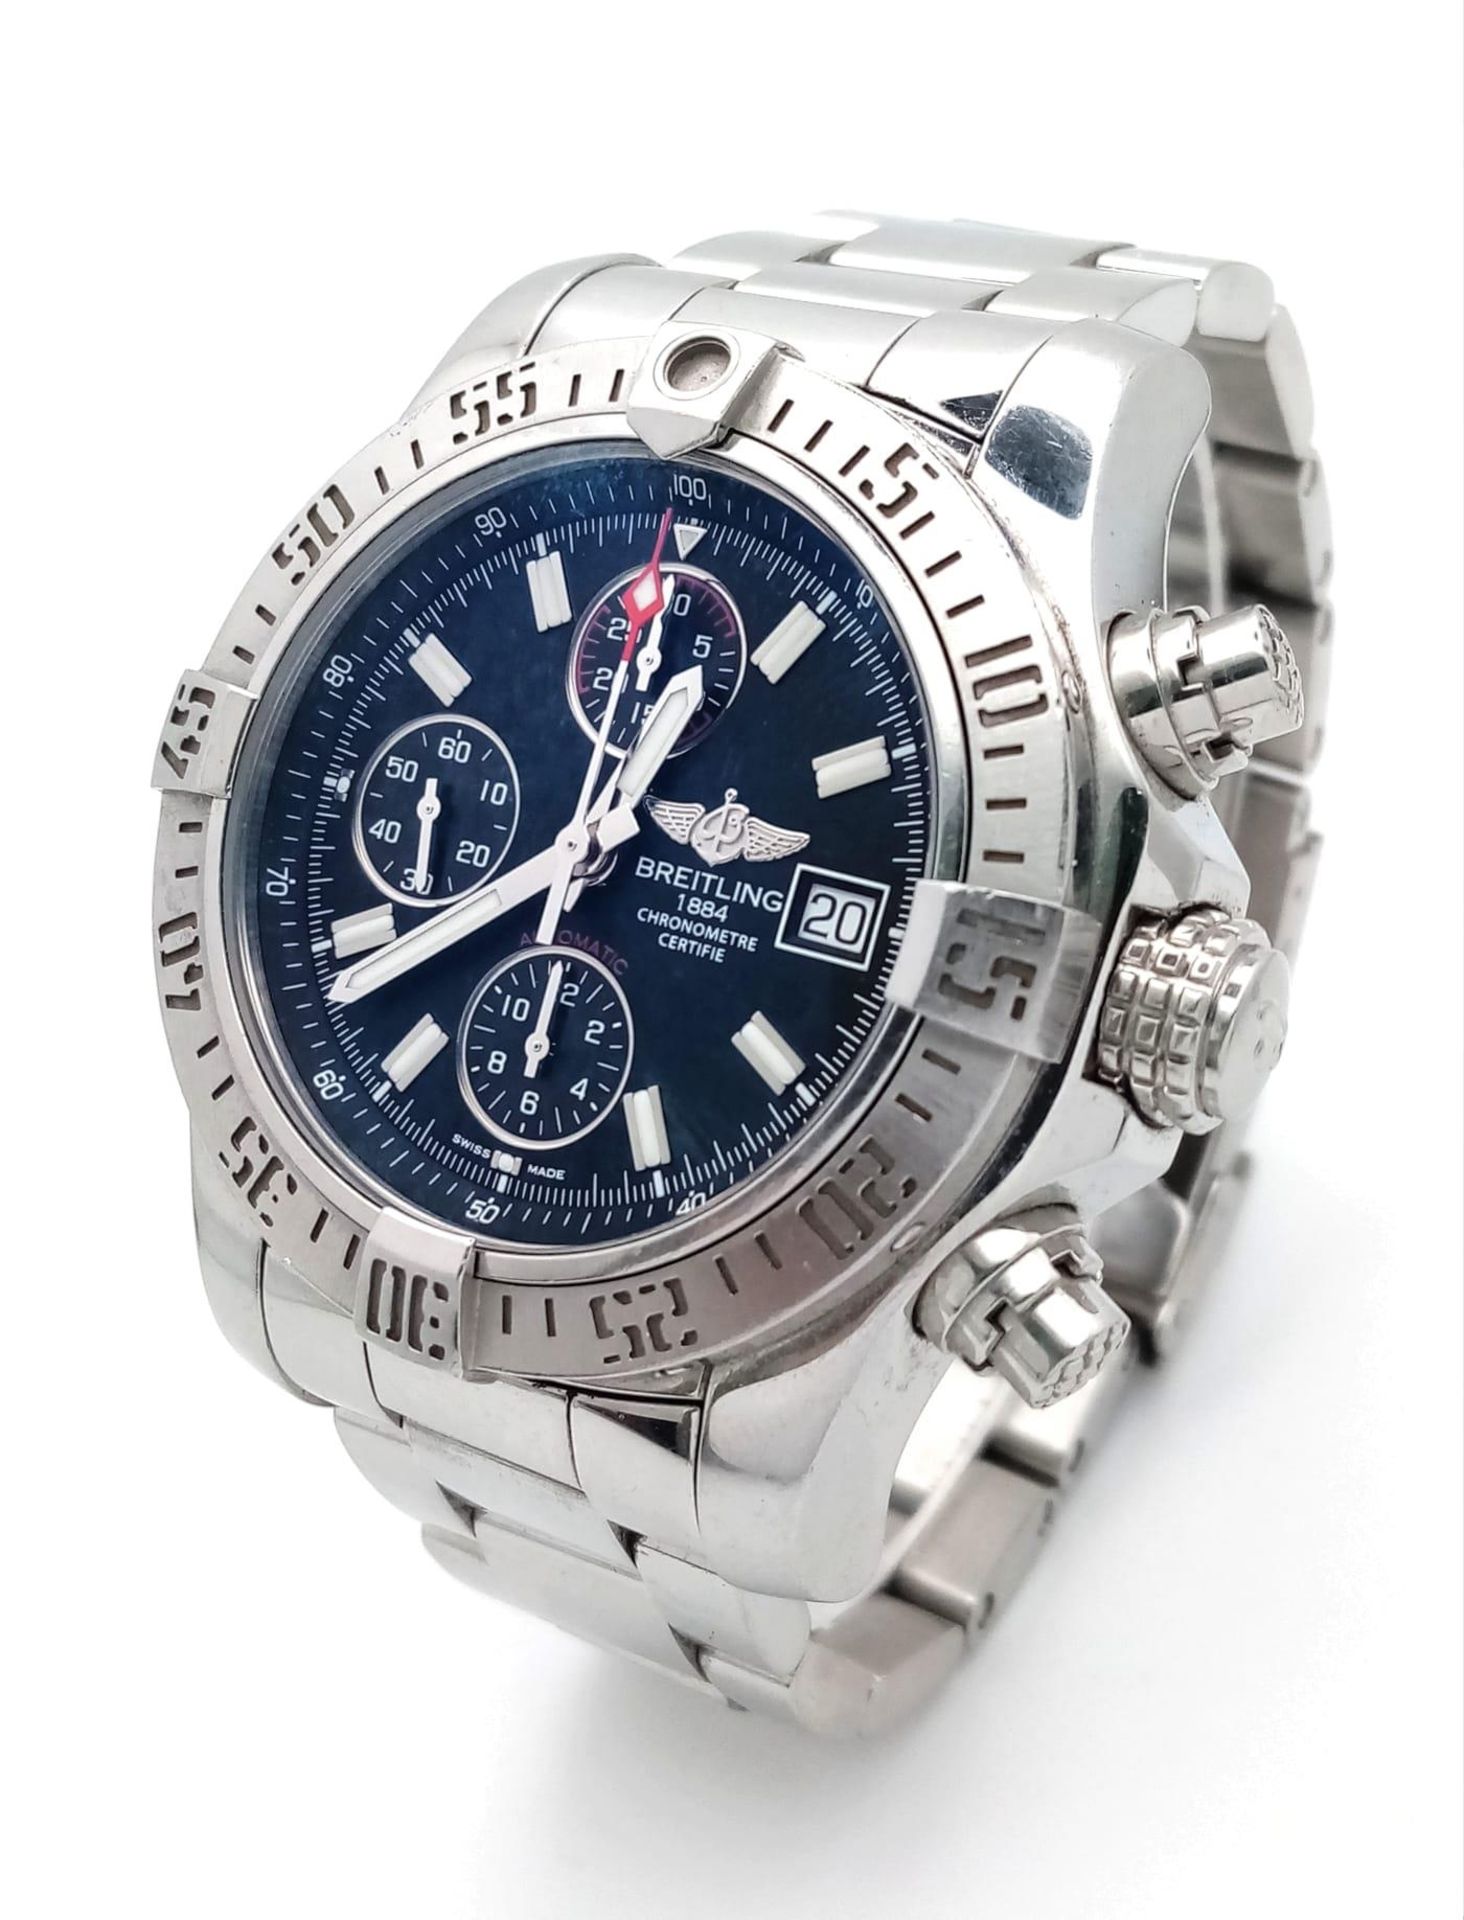 A Breitling Avenger II Chronograph Gents Watch. Stainless steel bracelet and case - 43mm. Black dial